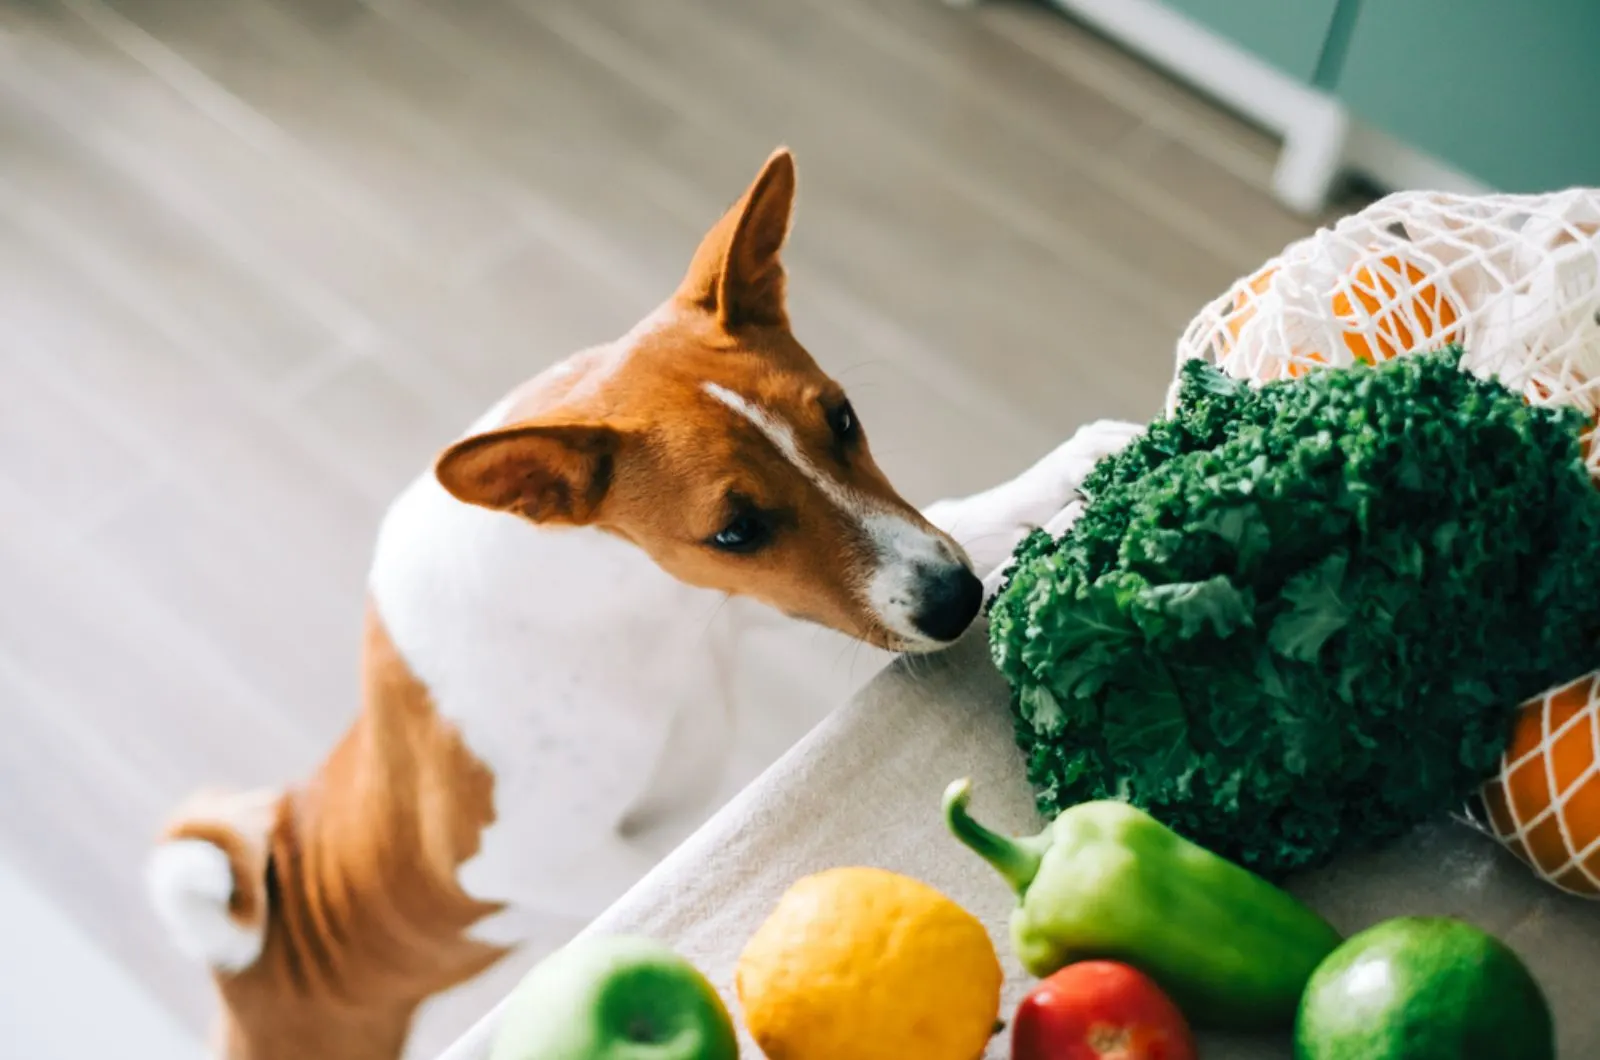 Basenji dog puppy climbs on the table with fresh vegetables at home in the kitchen